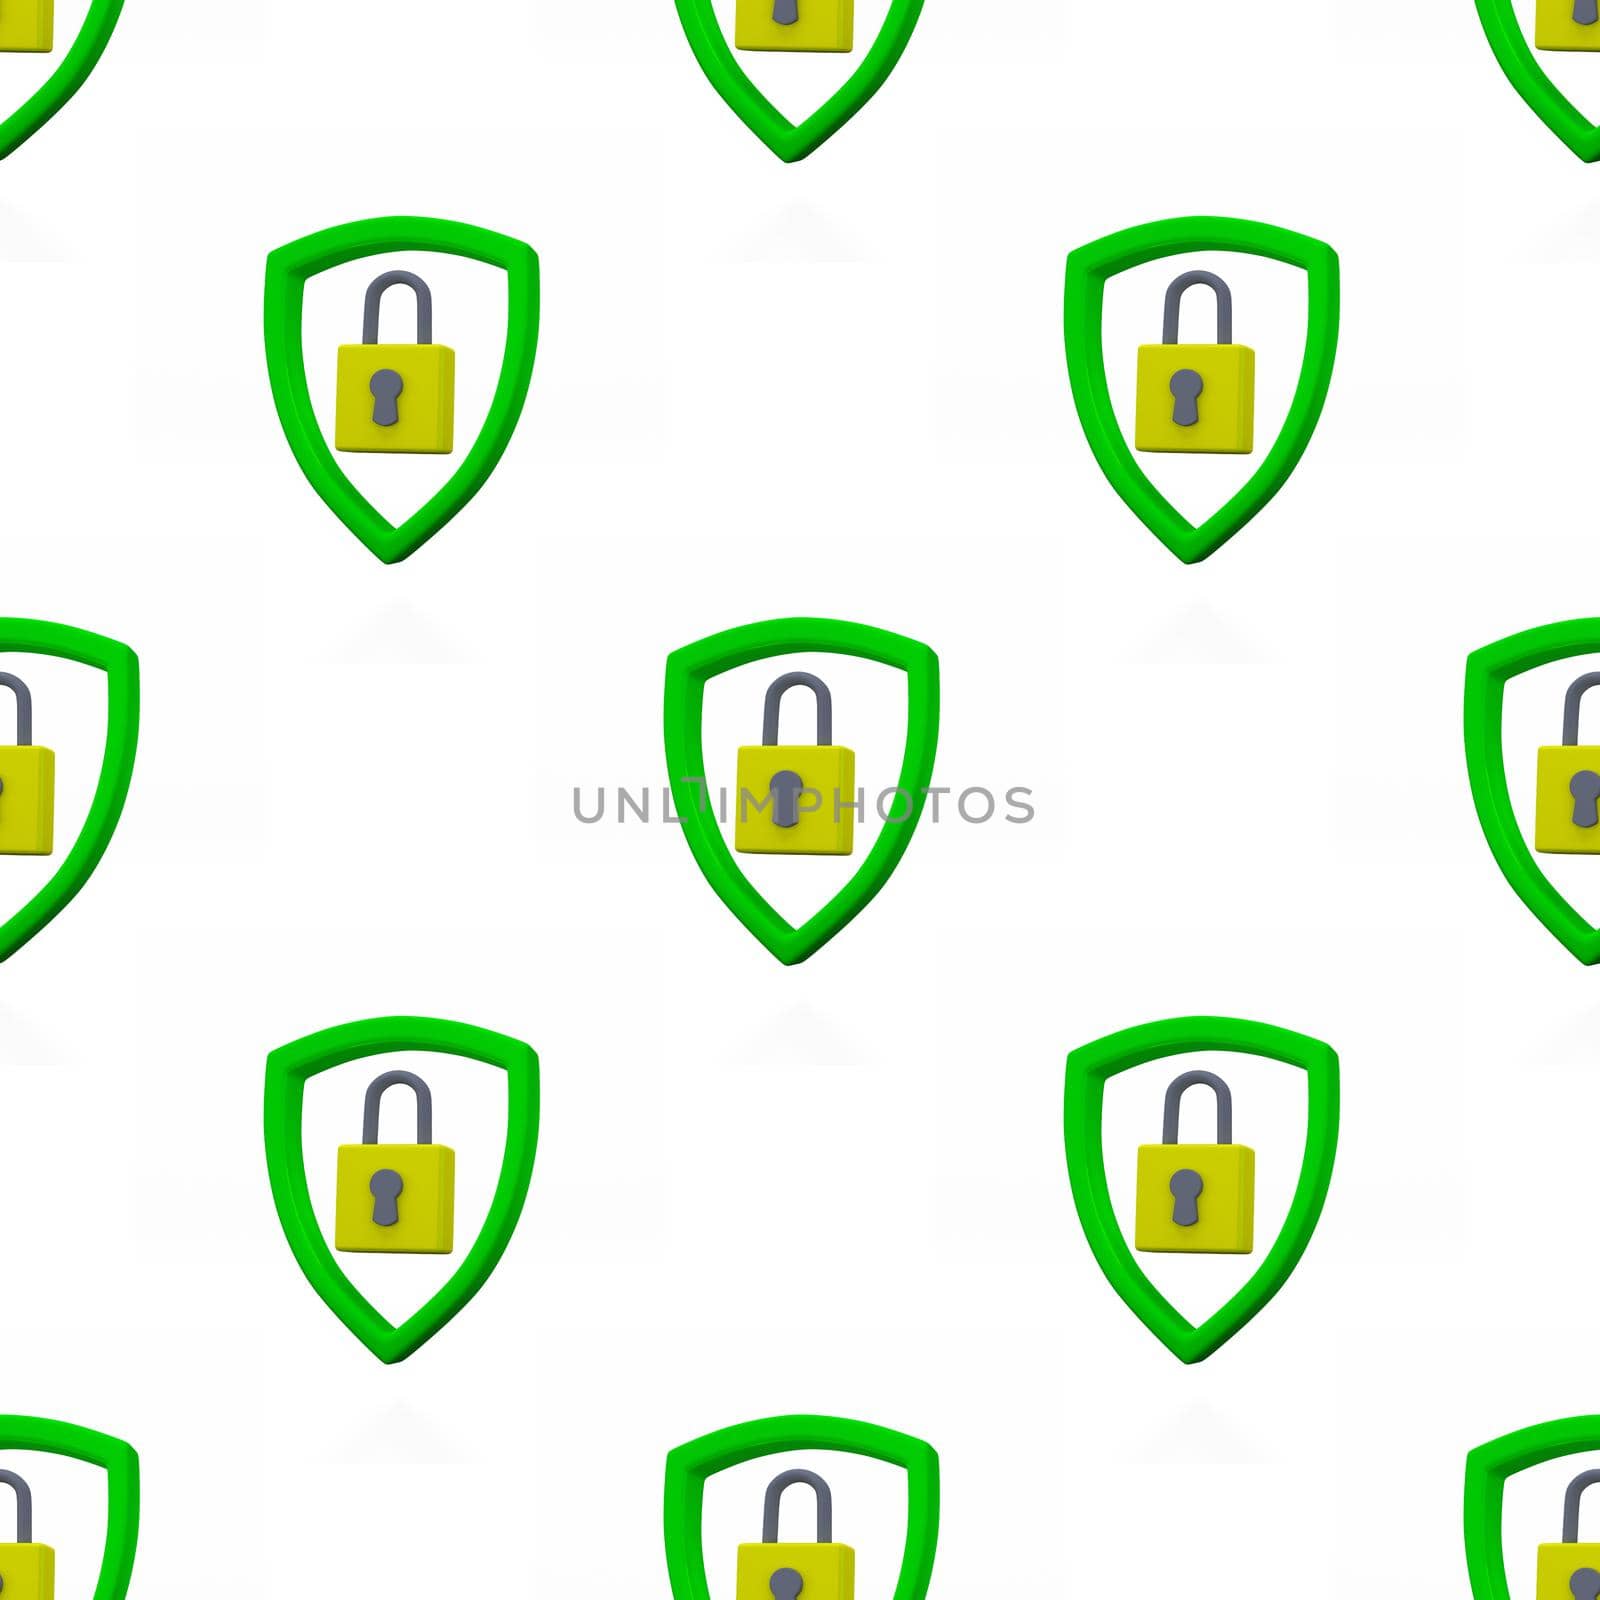 Padlock in shield seamless pattern. Security, safety, protection, privacy concept. Minimalism concept. 3d illustration 3D render